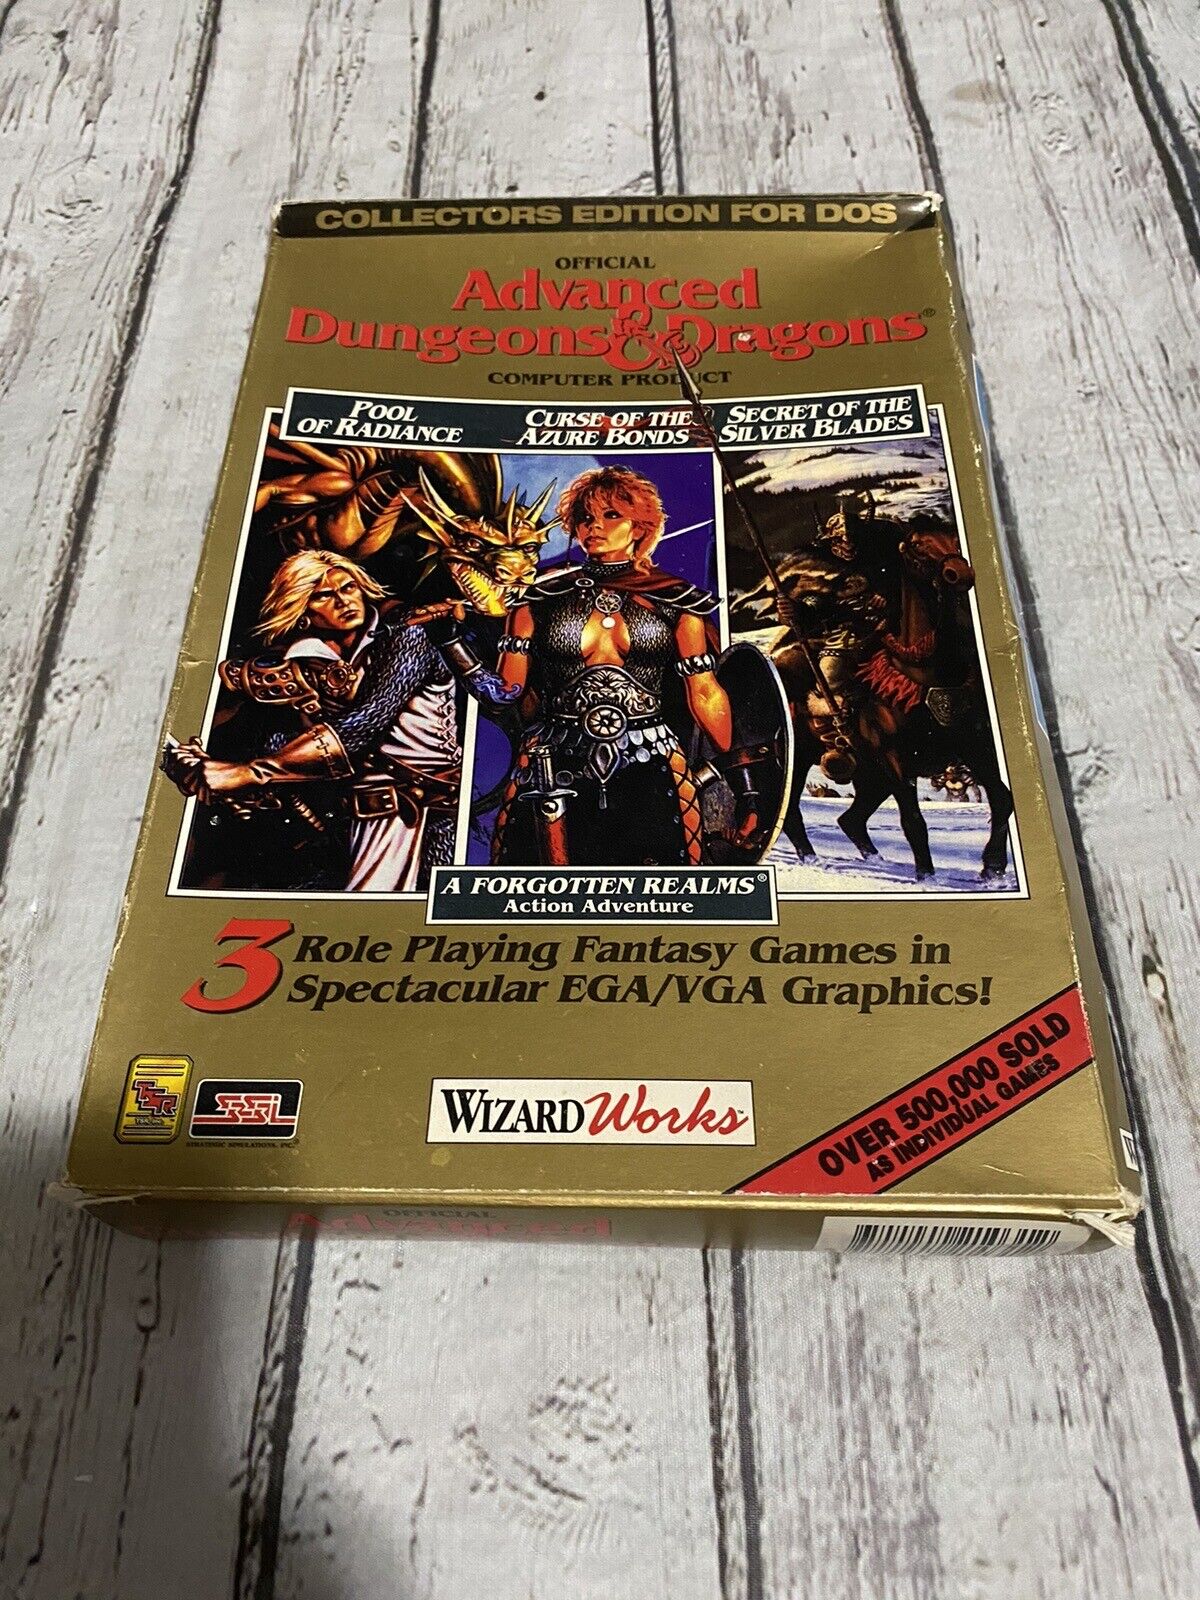 Advanced Dungeons & Dragons- Collectors Editions for DOS- CIB- Box Damage